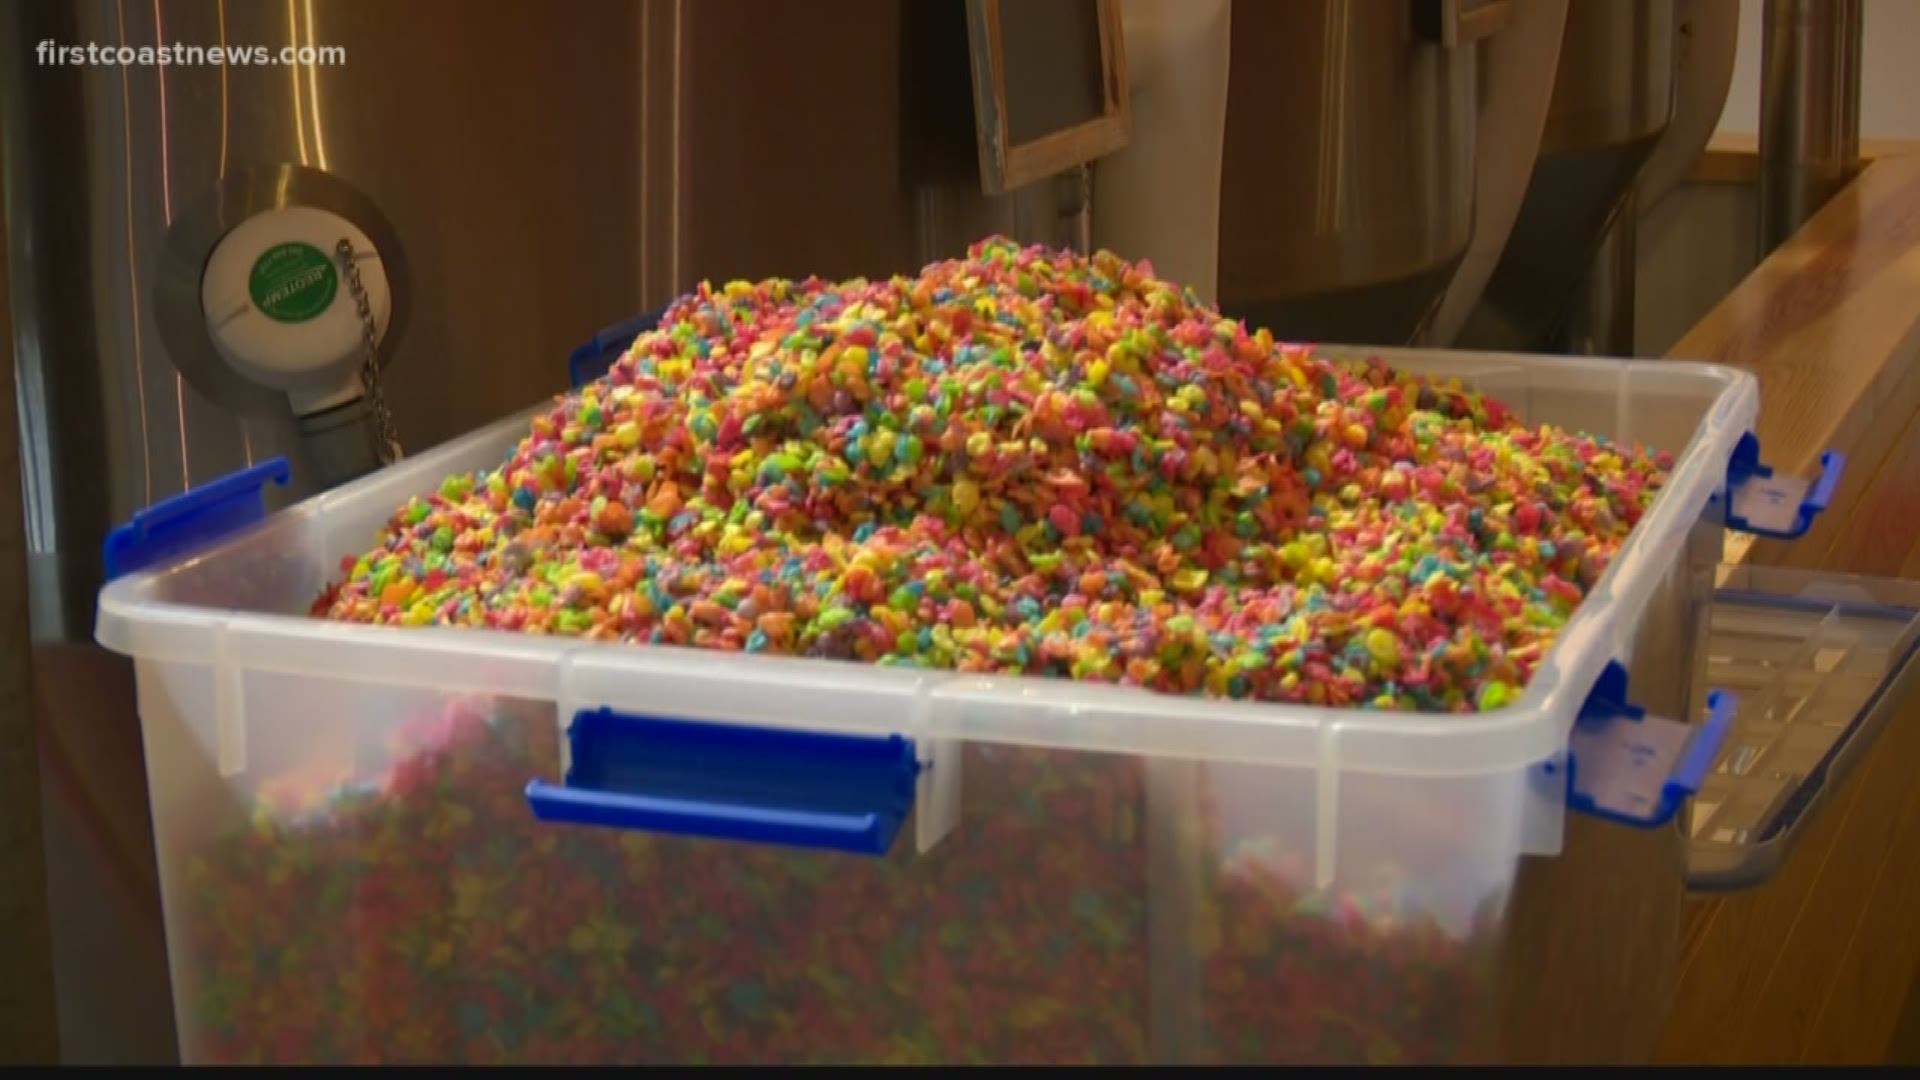 Bold City Brewery is cashing in on the nostalgic beer craze by brewing up a beer infused with Fruity Pebbles.